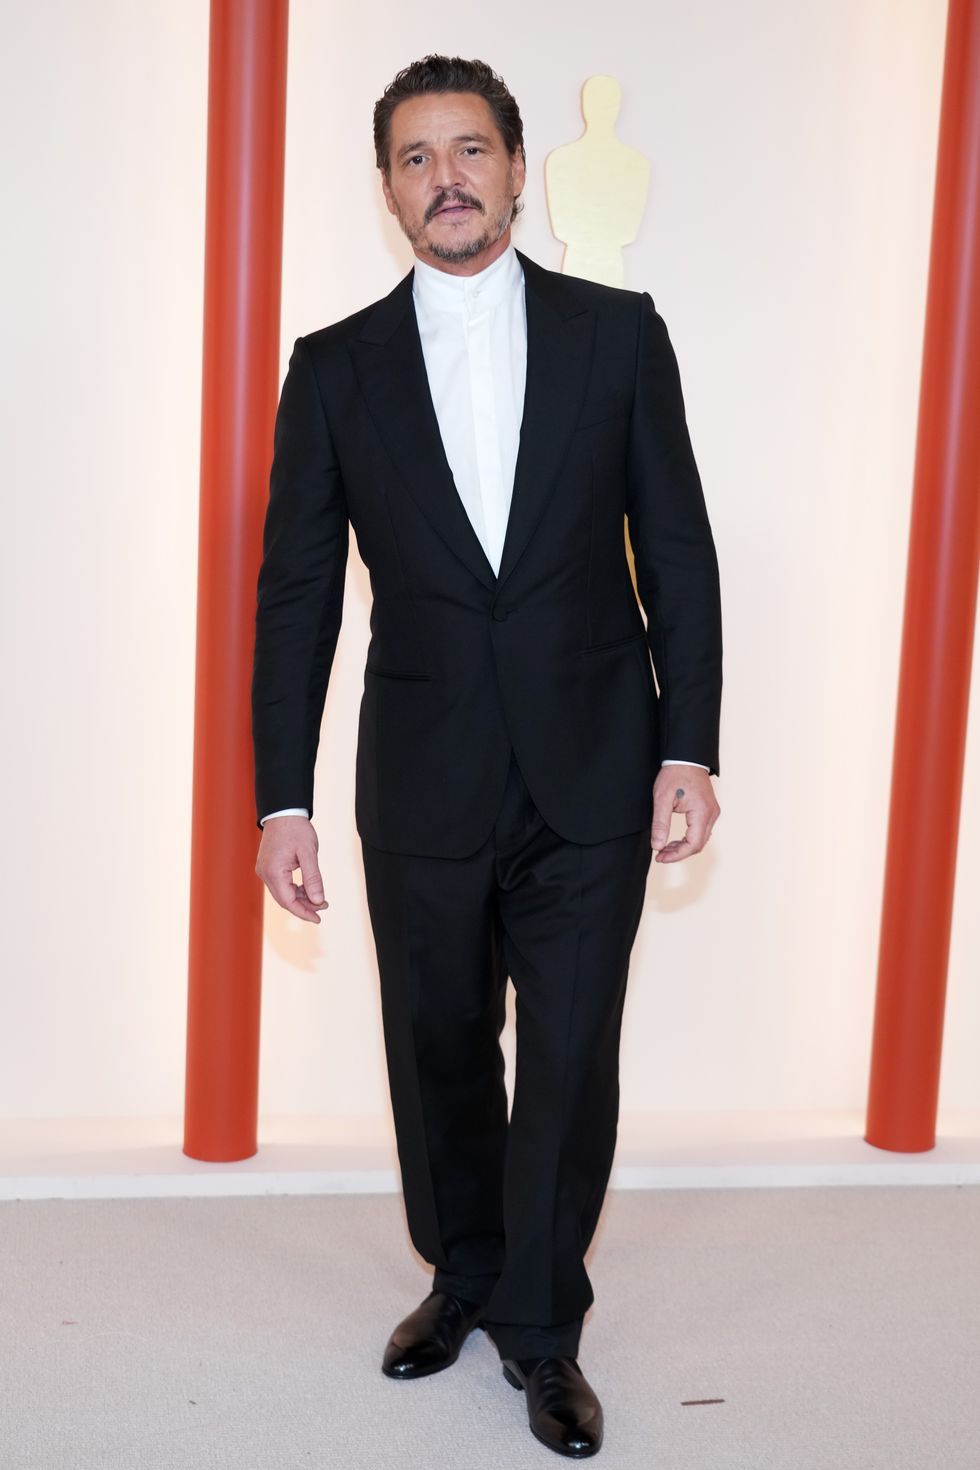 hollywood, california march 12 pedro pascal attend the 95th annual academy awards on march 12, 2023 in hollywood, california photo by kevin mazurgetty images